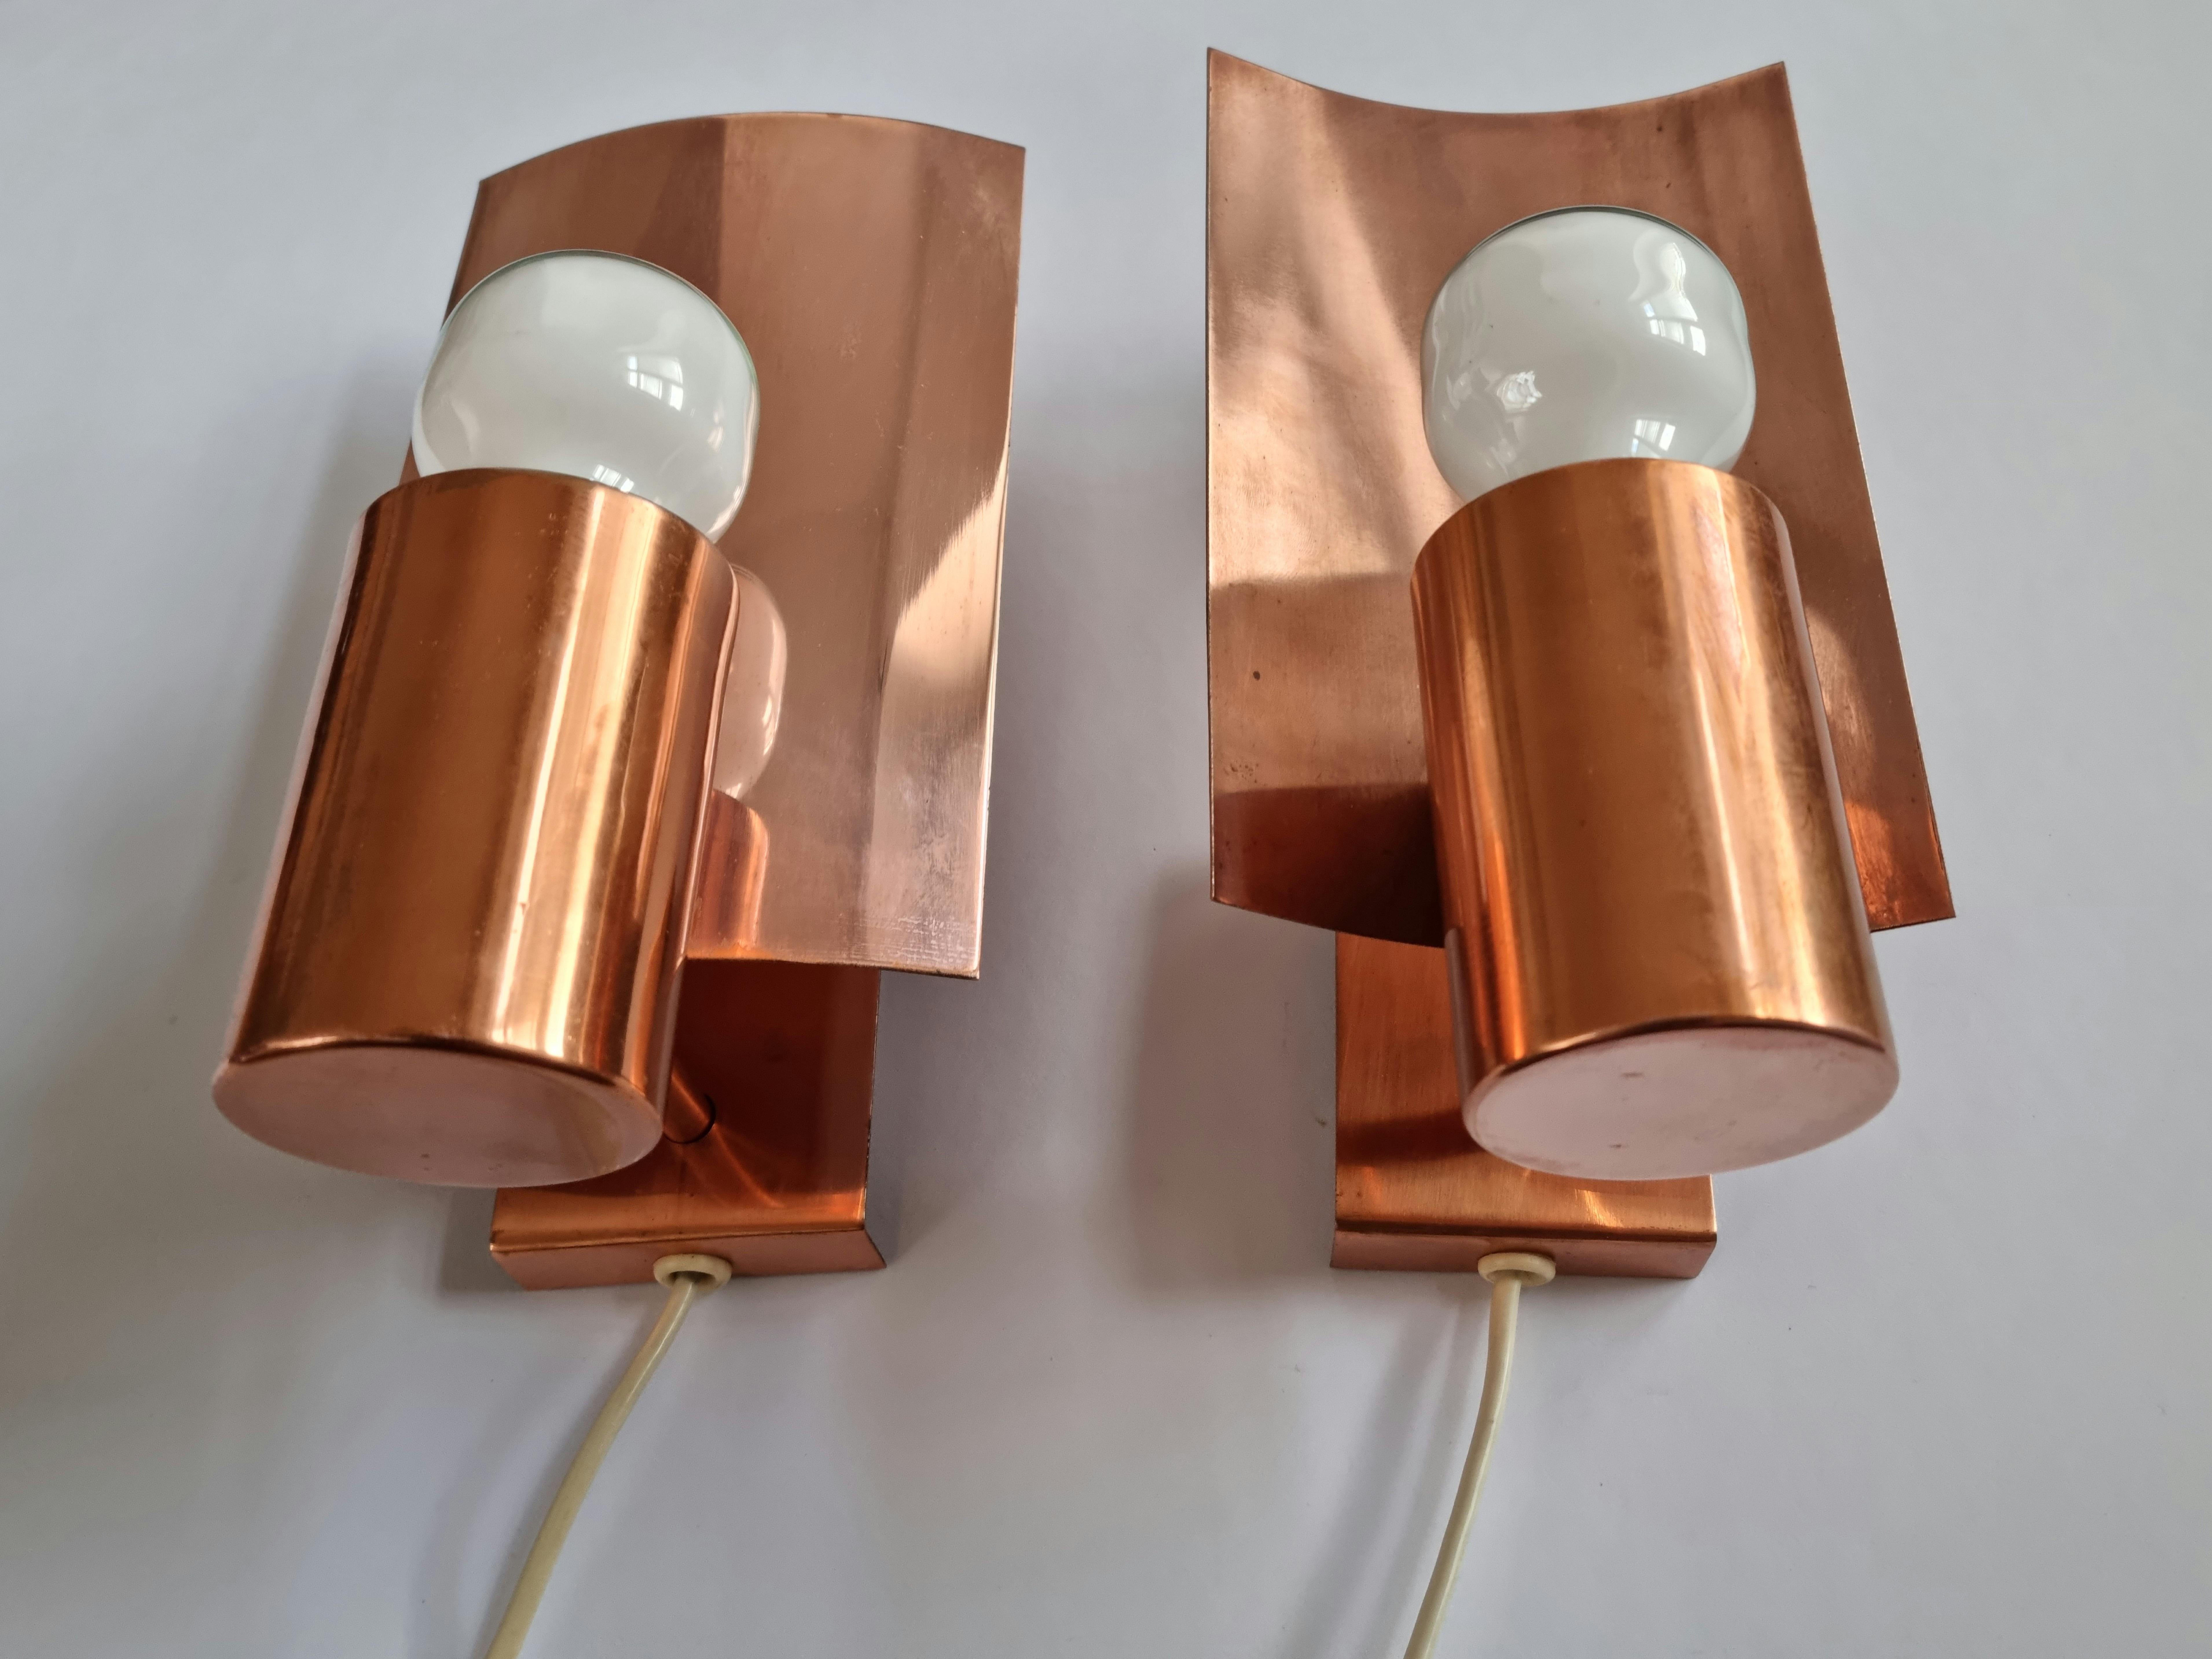 Pair of Midcentury Copper Wall Lamps, Denmark, 1960s For Sale 7